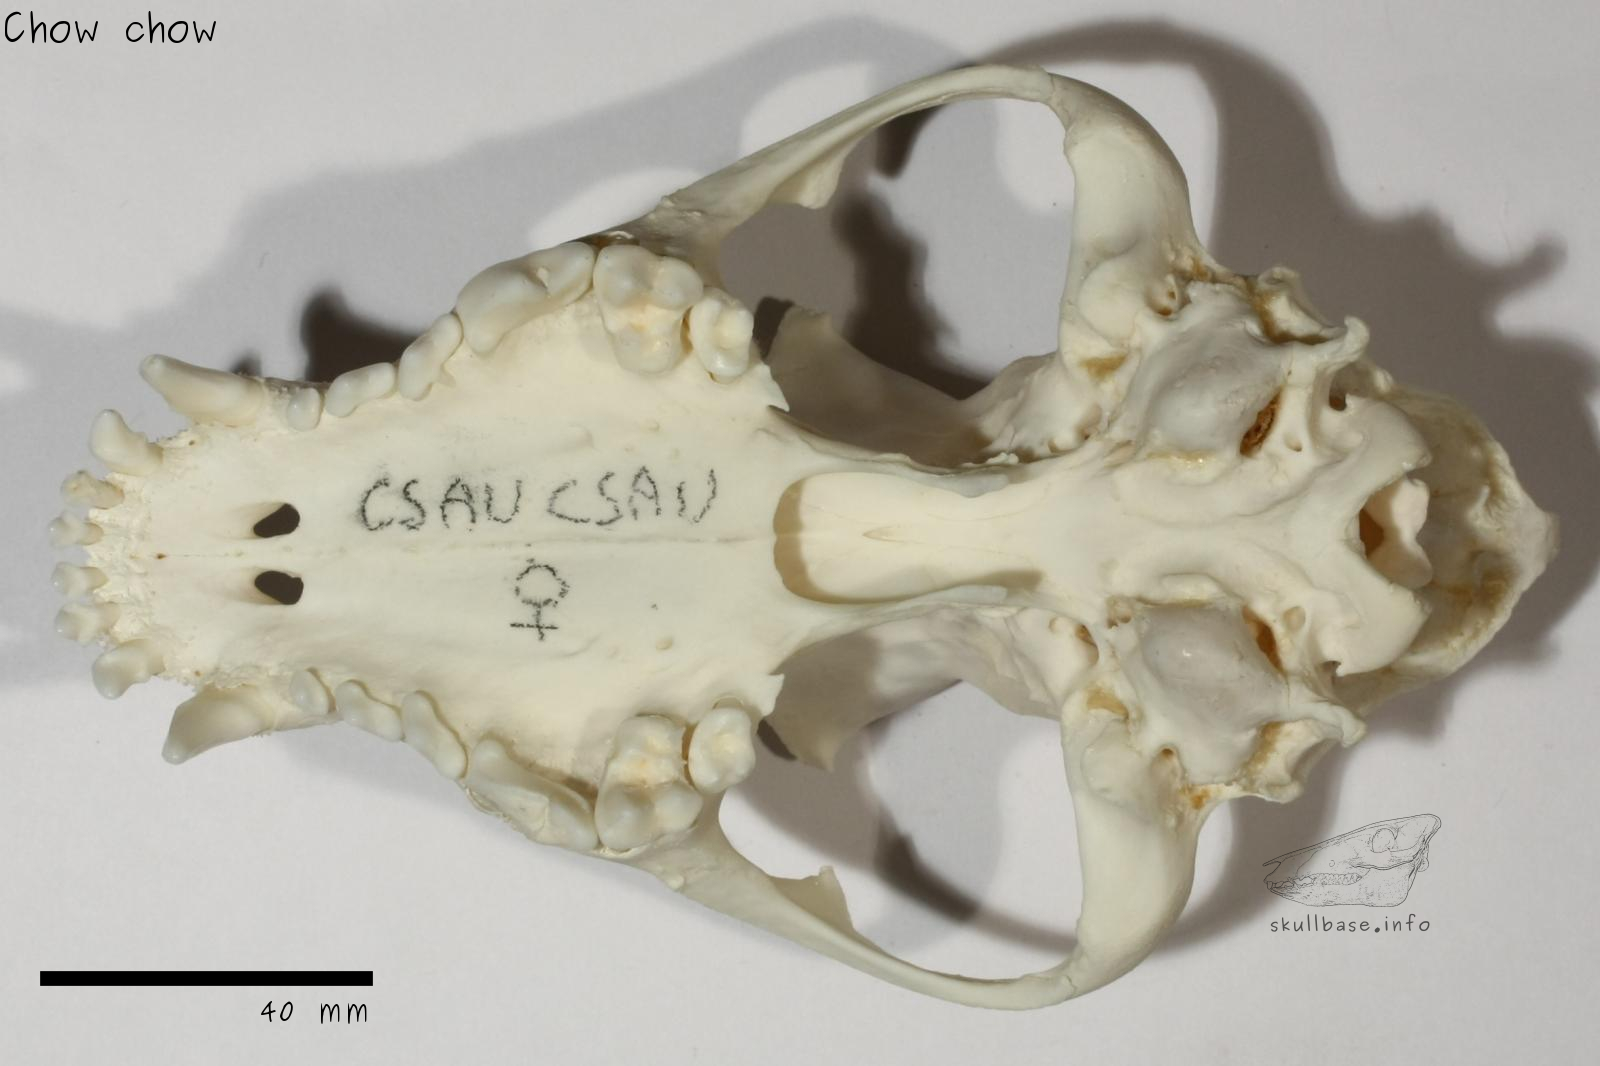 Chow chow (Canis lupus familiaris) skull ventral view